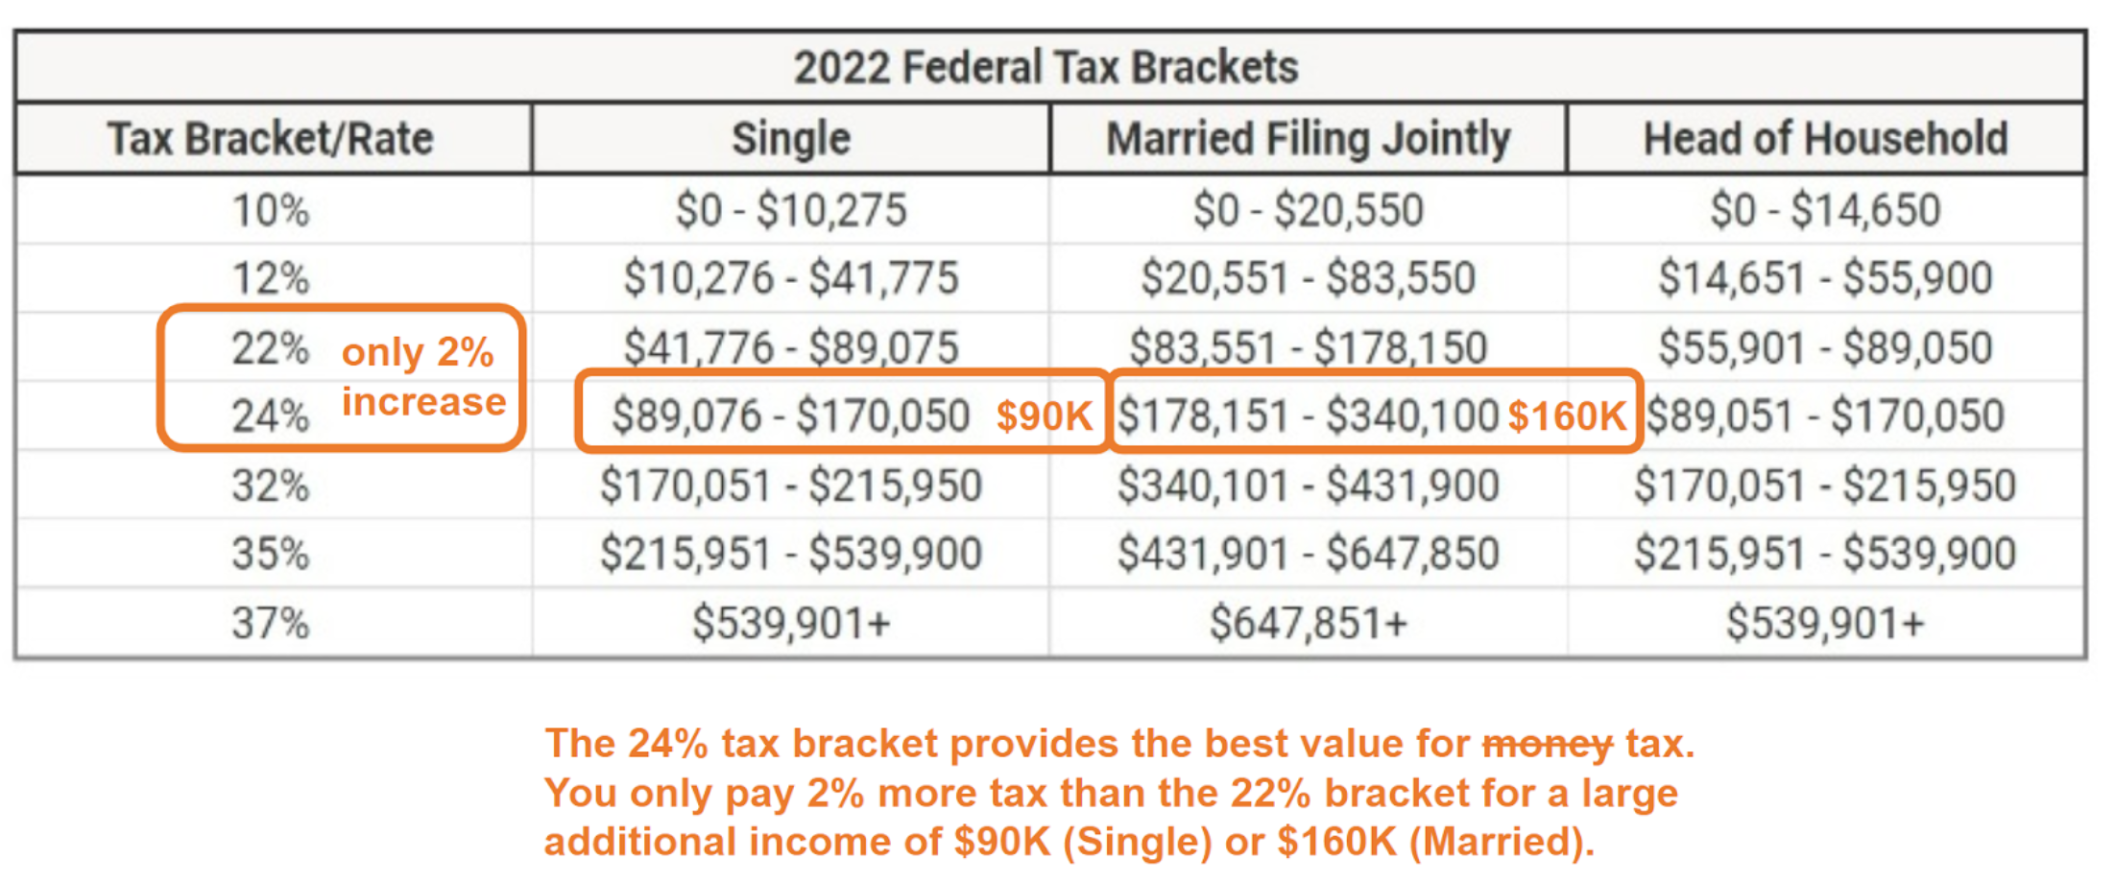 The 24% tax bracket provides the best value for tax